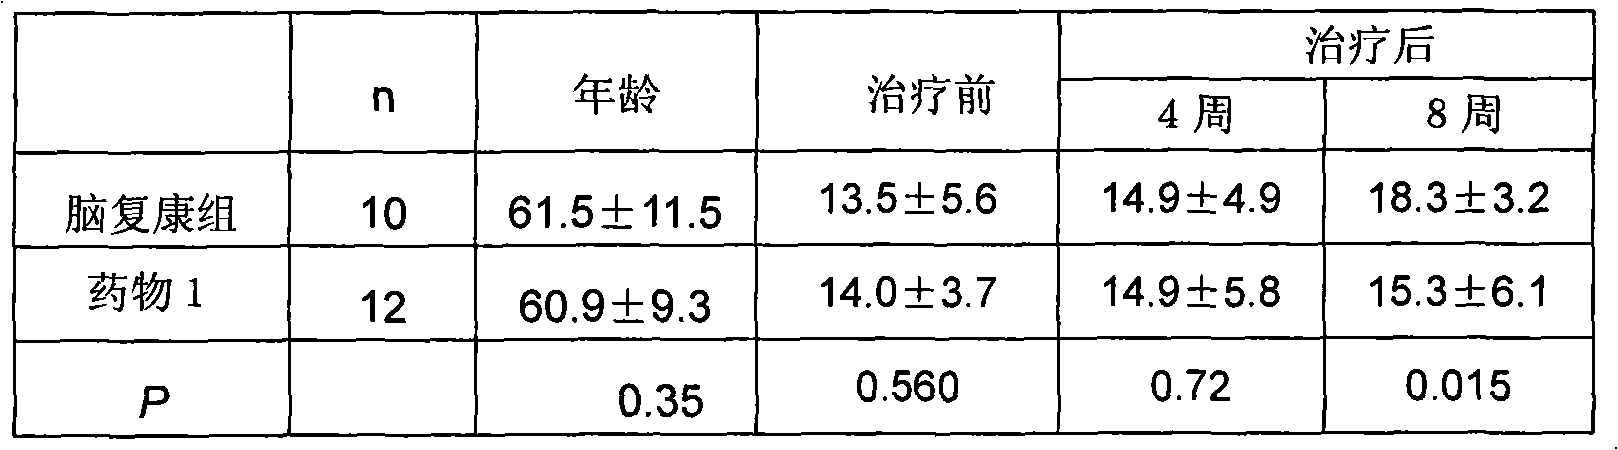 Mixture for treating alzheimer's disease, preparation method and application thereof